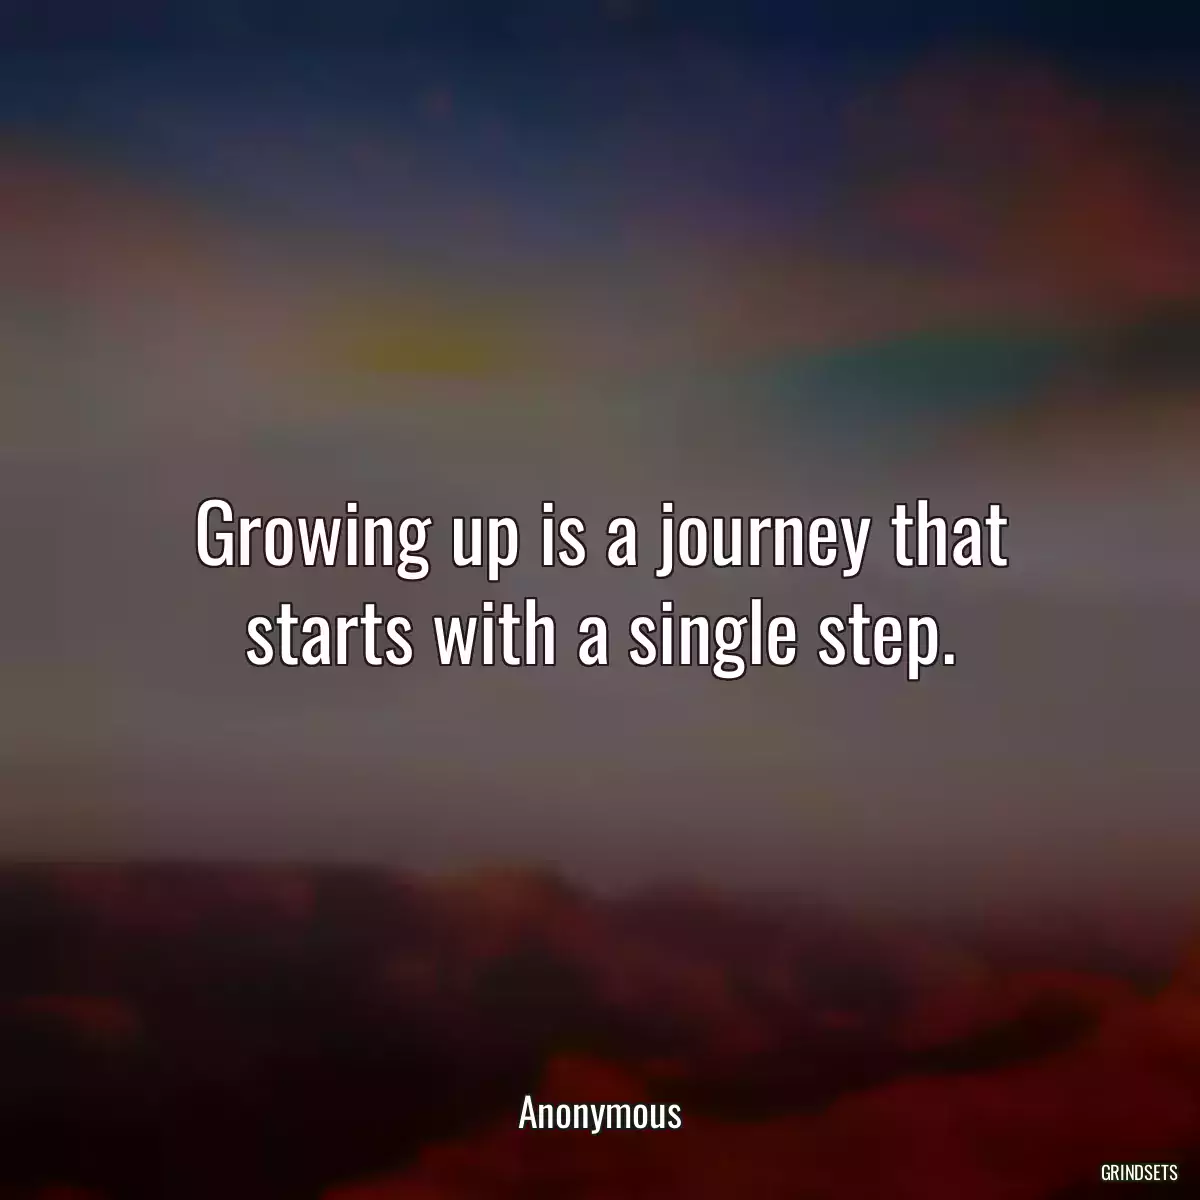 Growing up is a journey that starts with a single step.